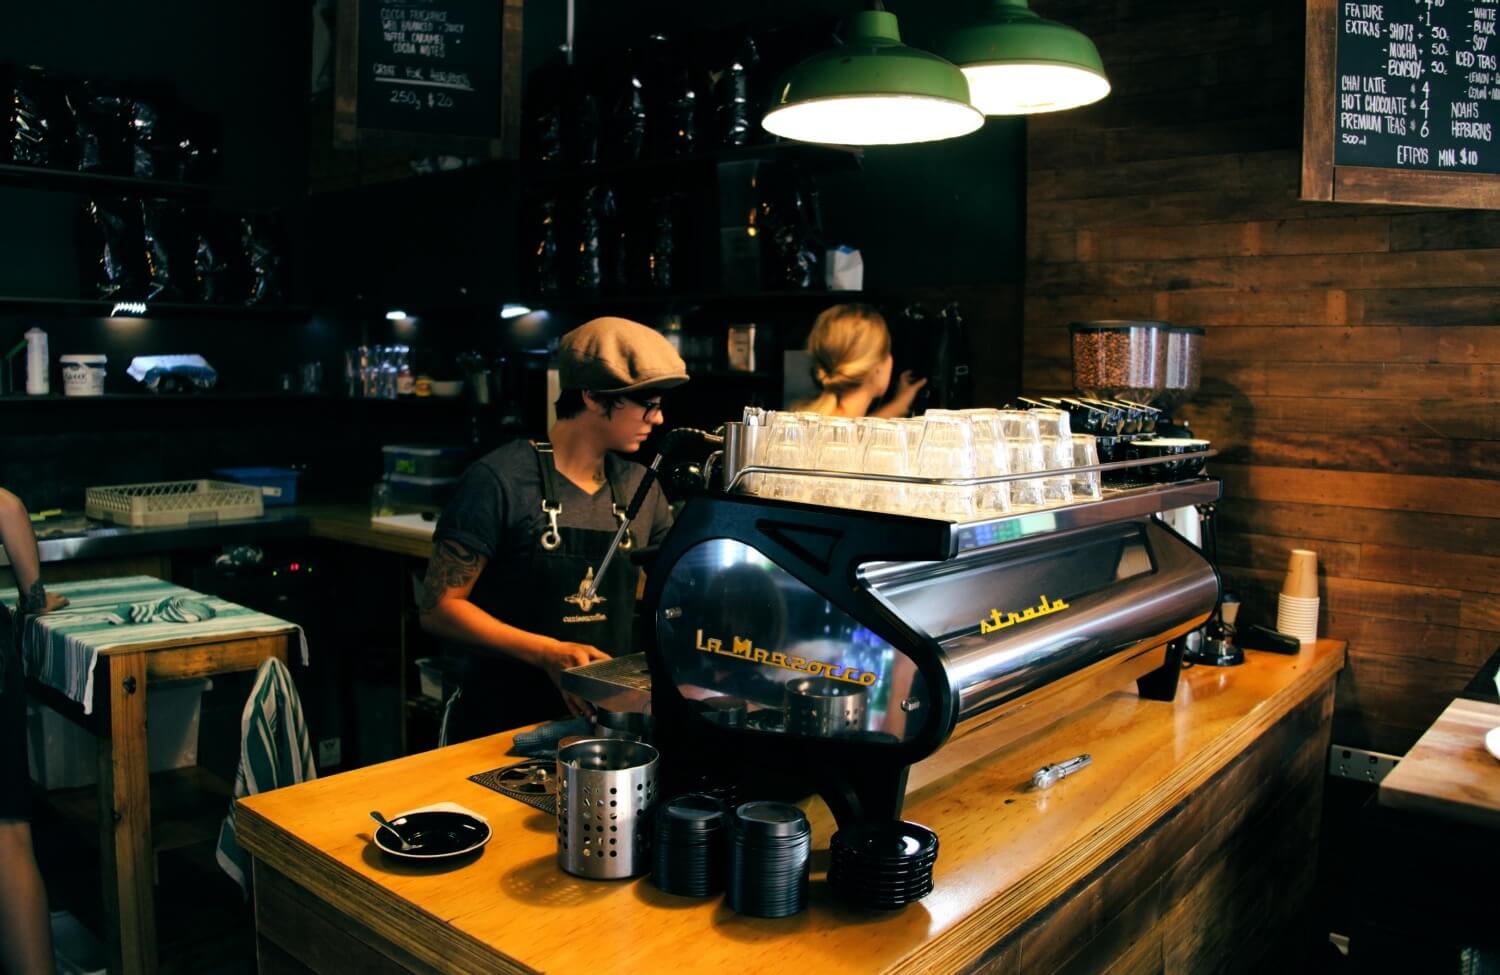 Review - Canteen coffee, Gold coast